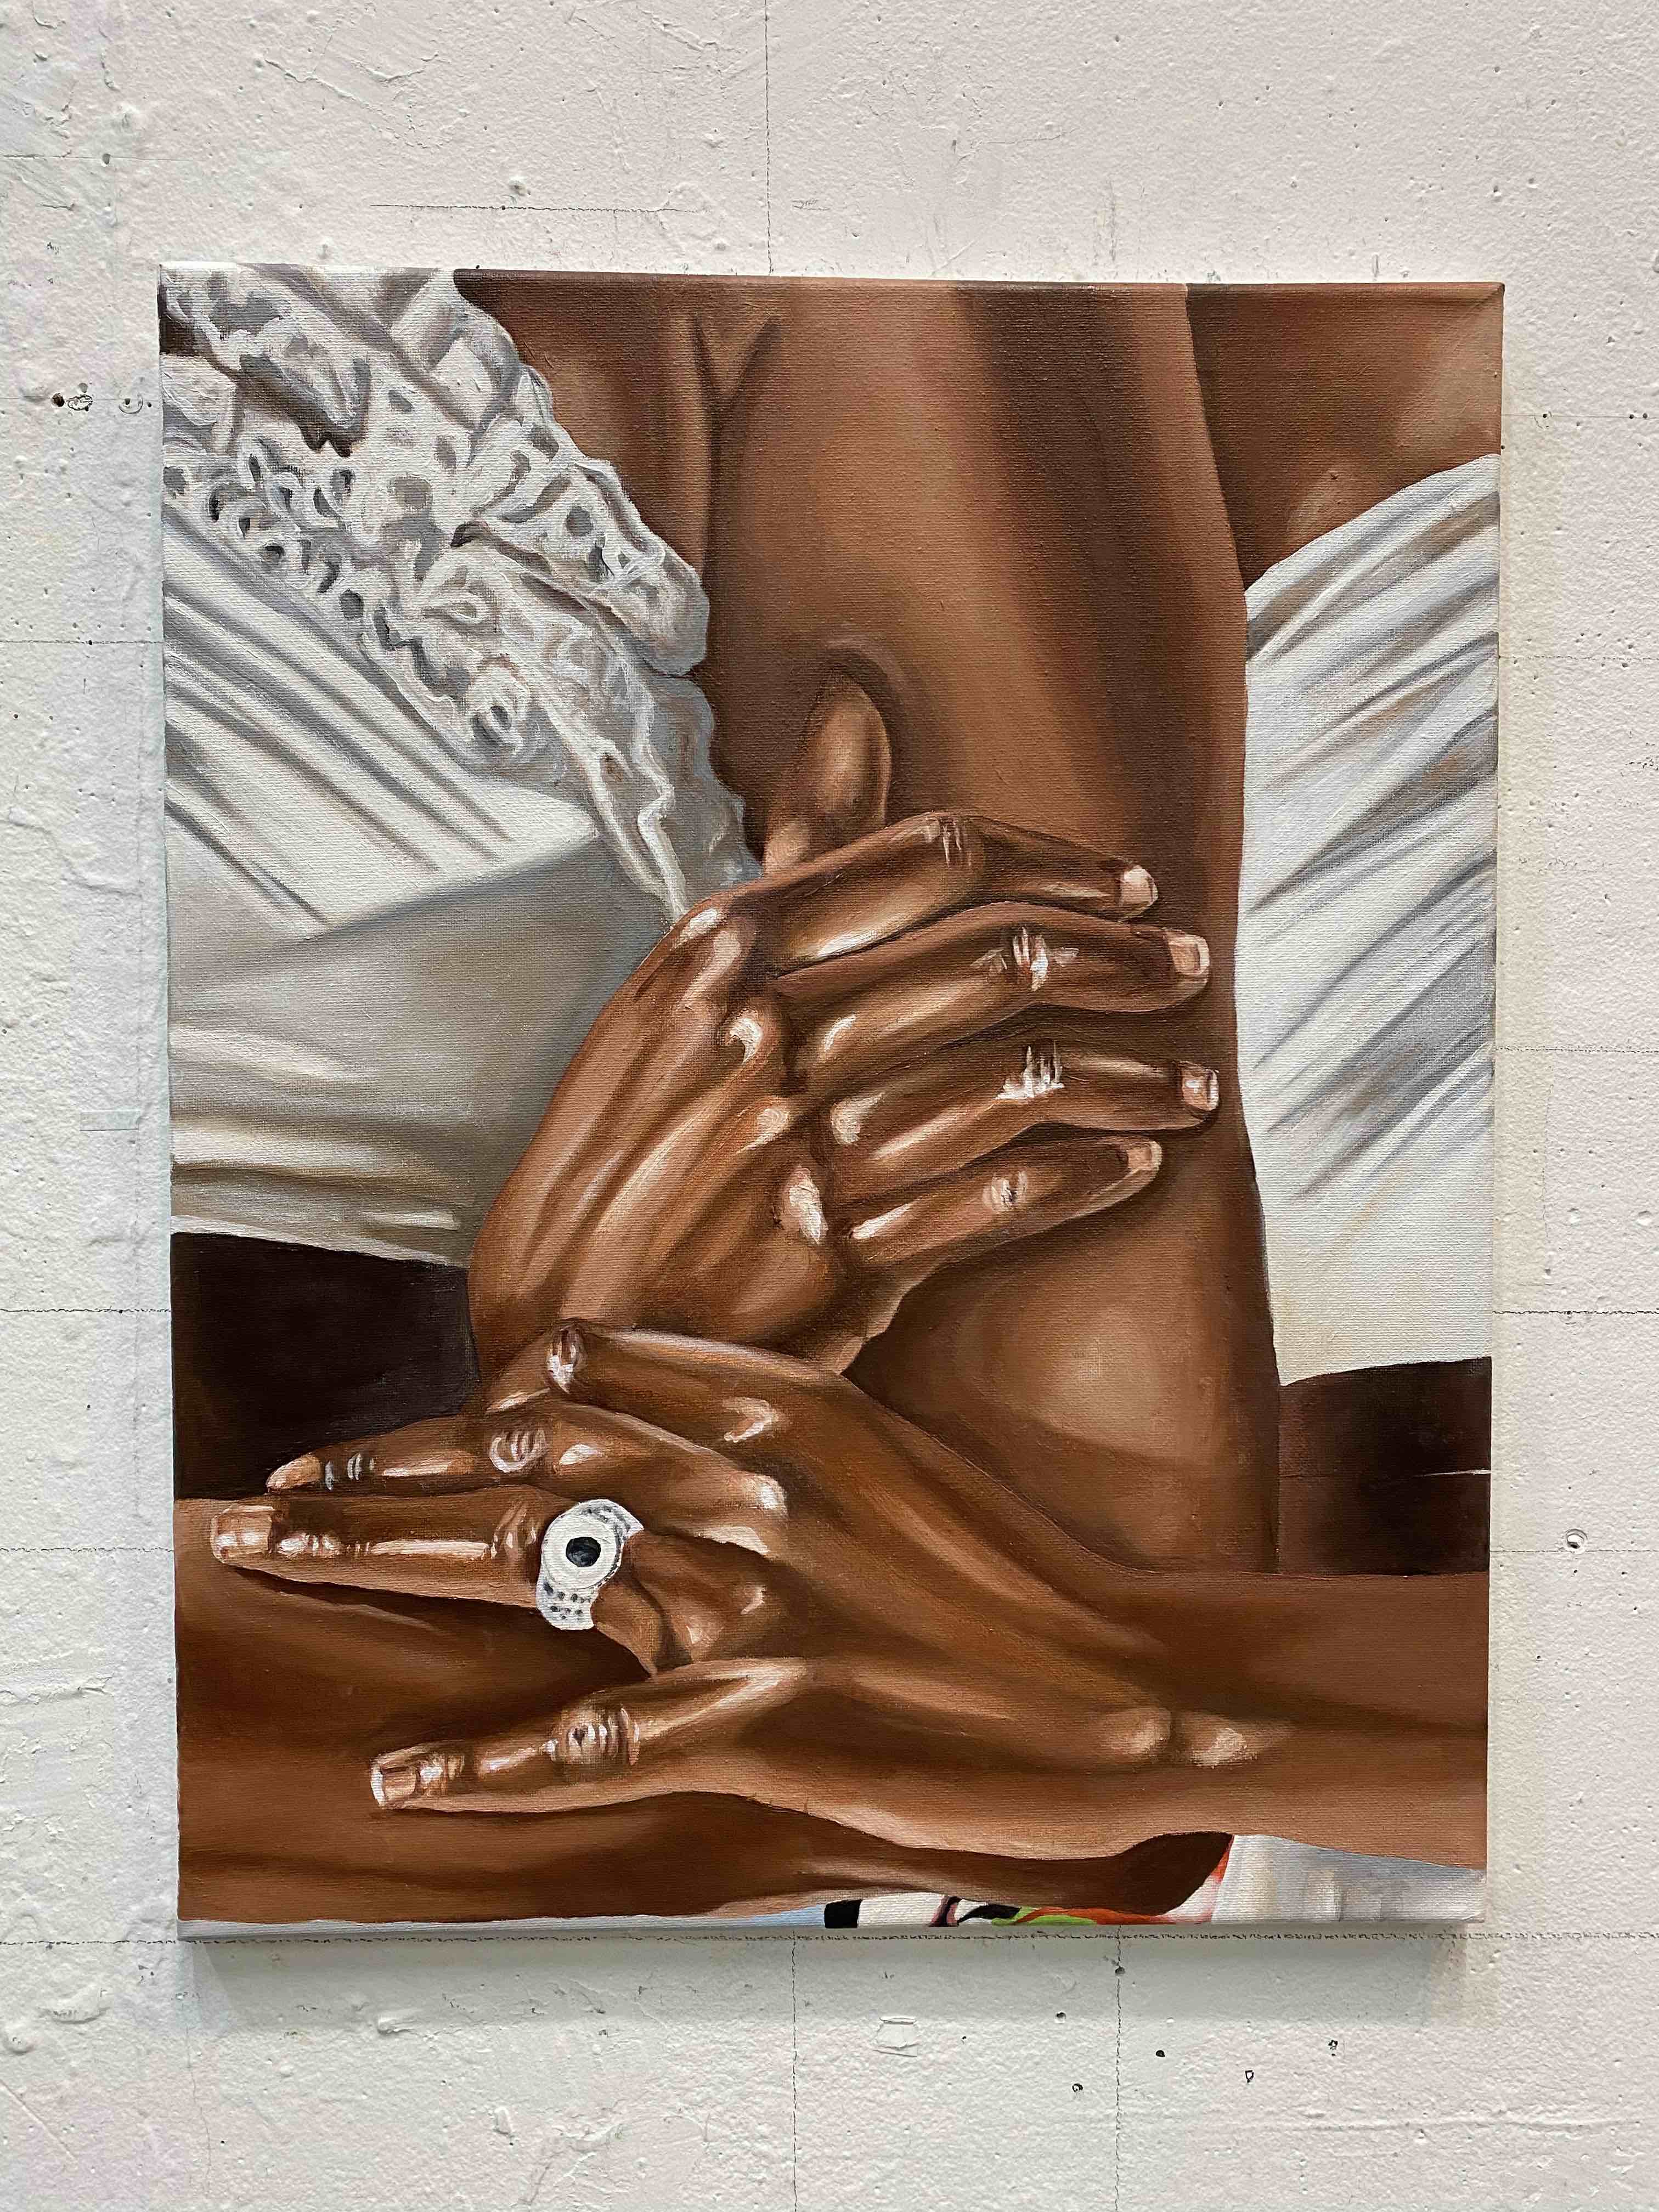 A painting of hands holding someone's arm in a loving way.